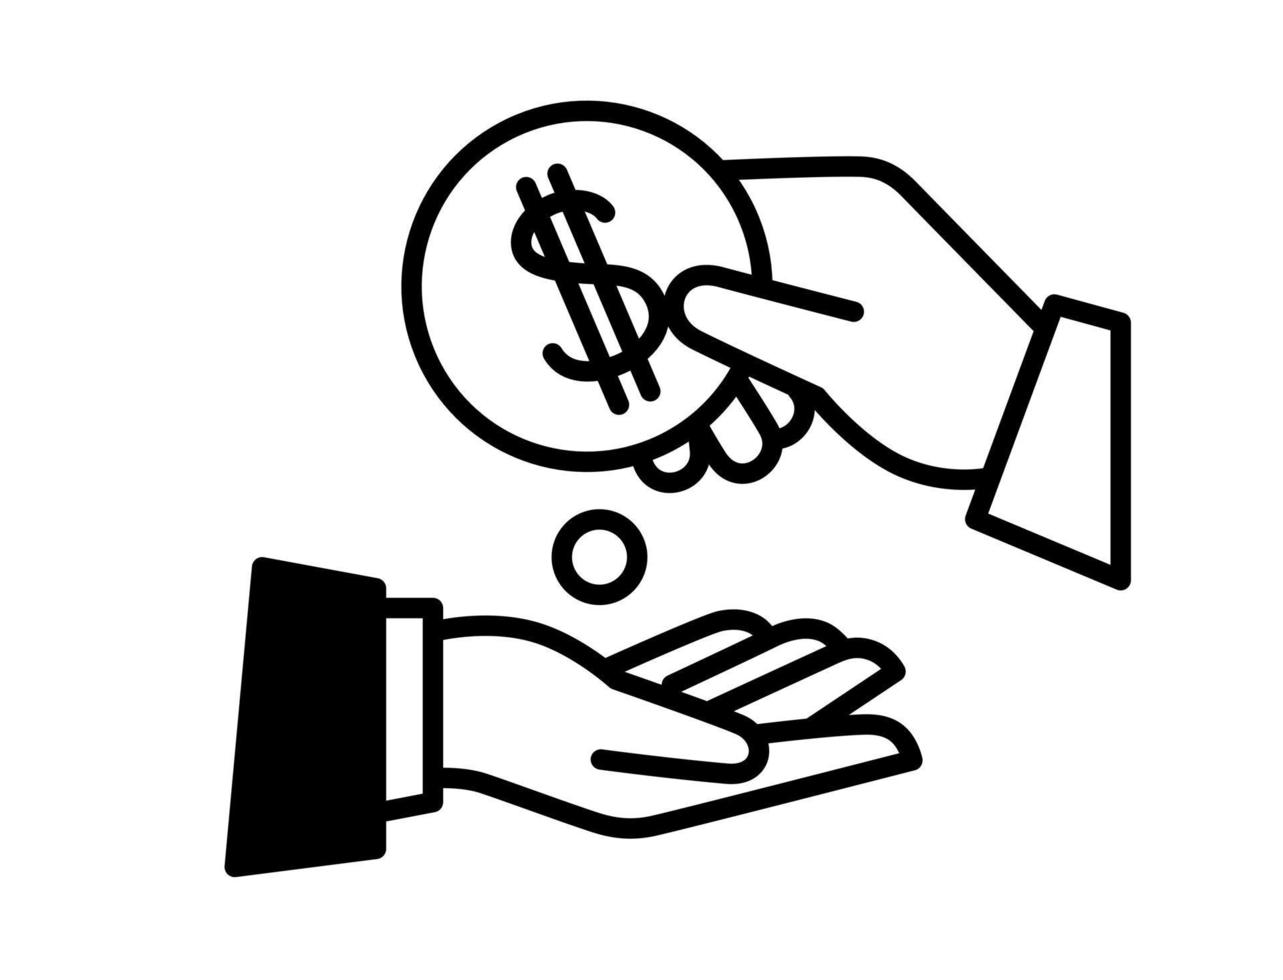 Outline icon of hands and dollar coins vector